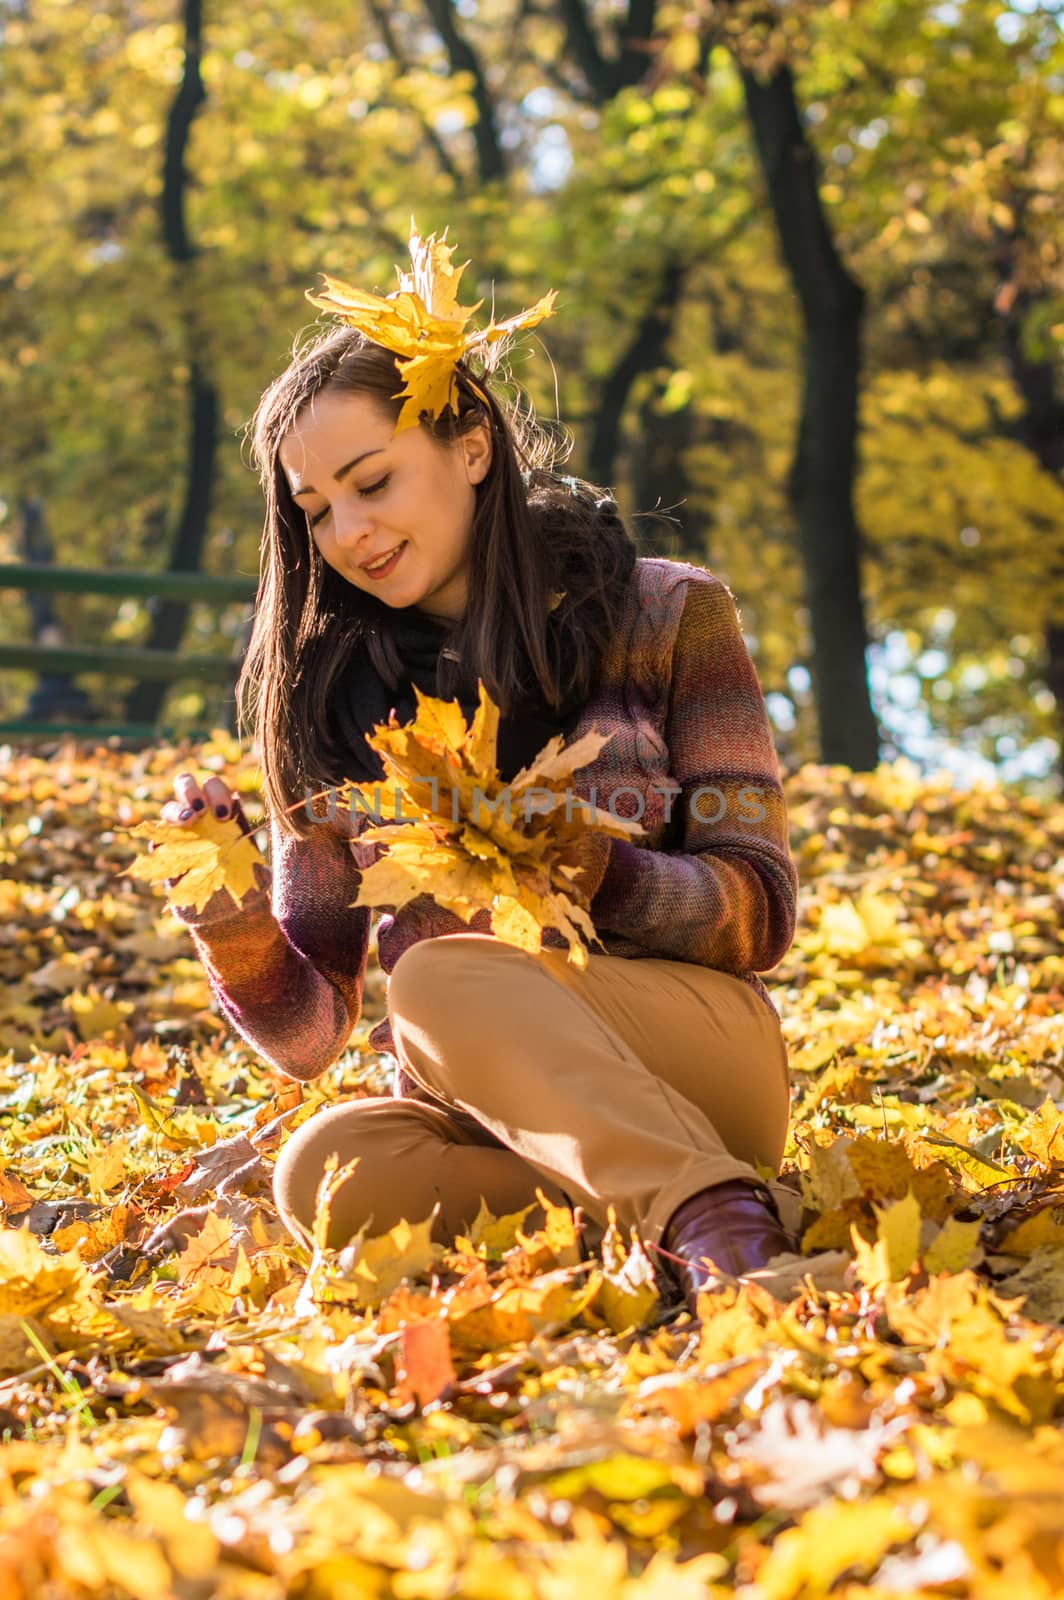 beautiful girl in autumn Park keeps yellow leaves